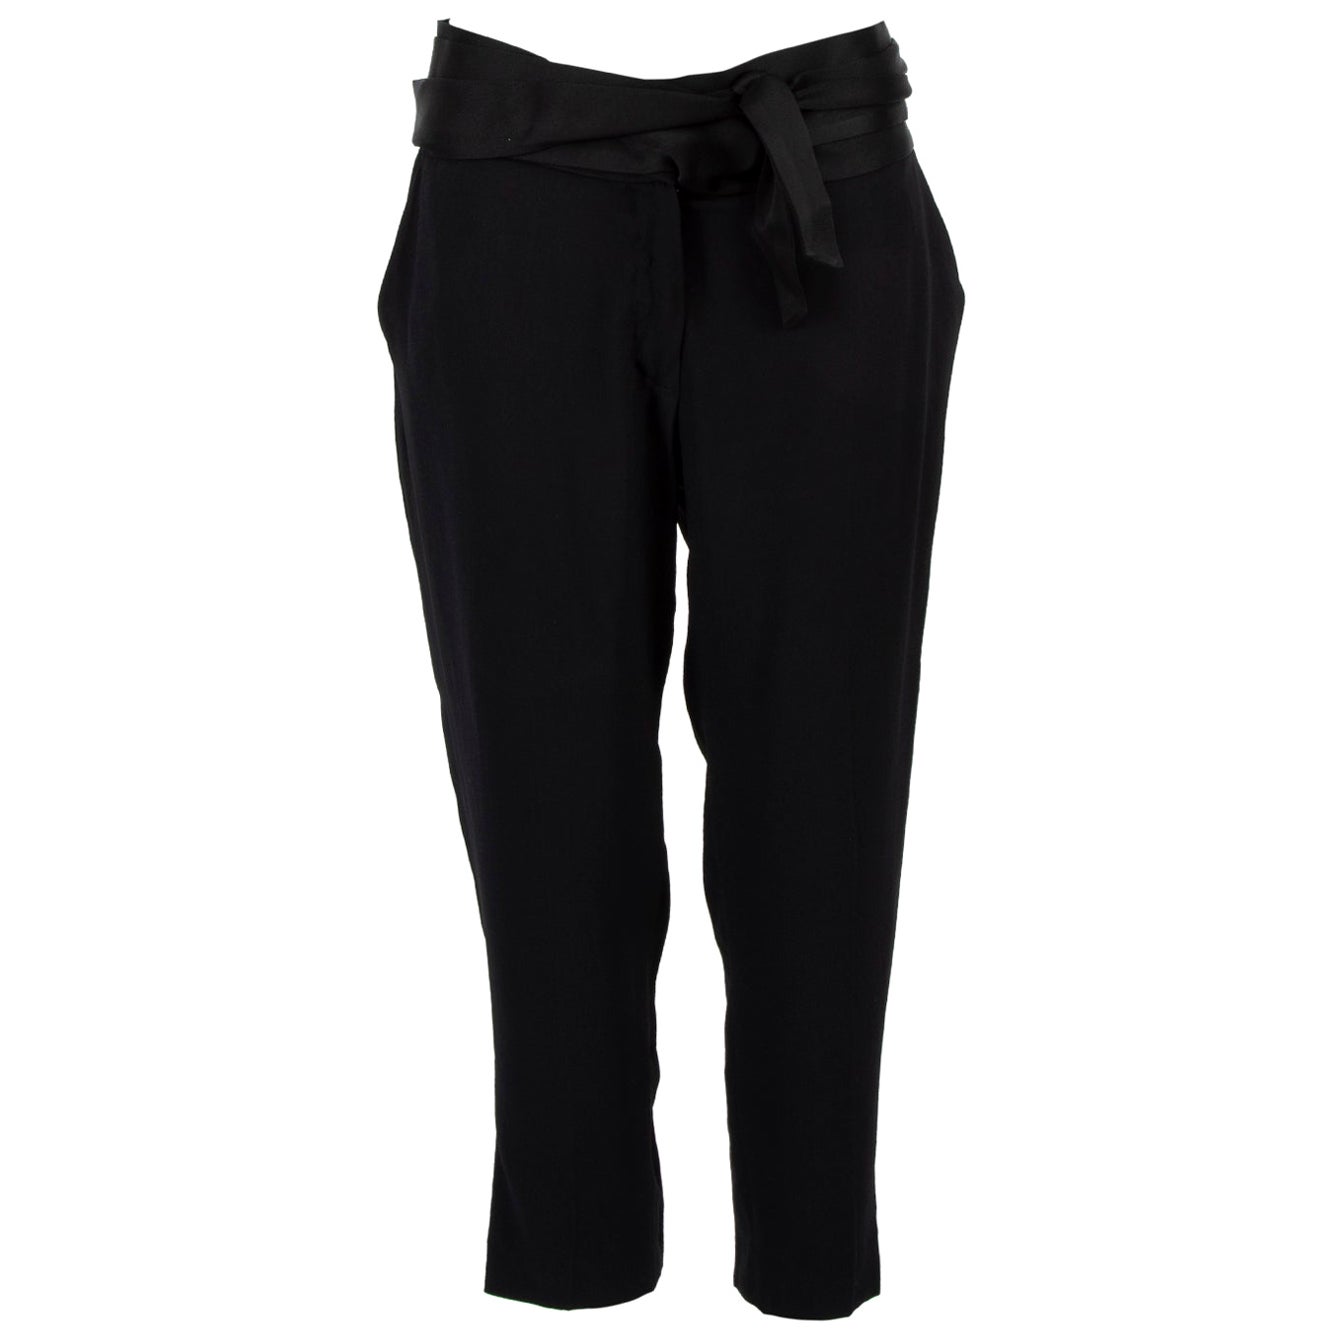 Pre-Loved Iro Women's Satin Pants with Tie Detail